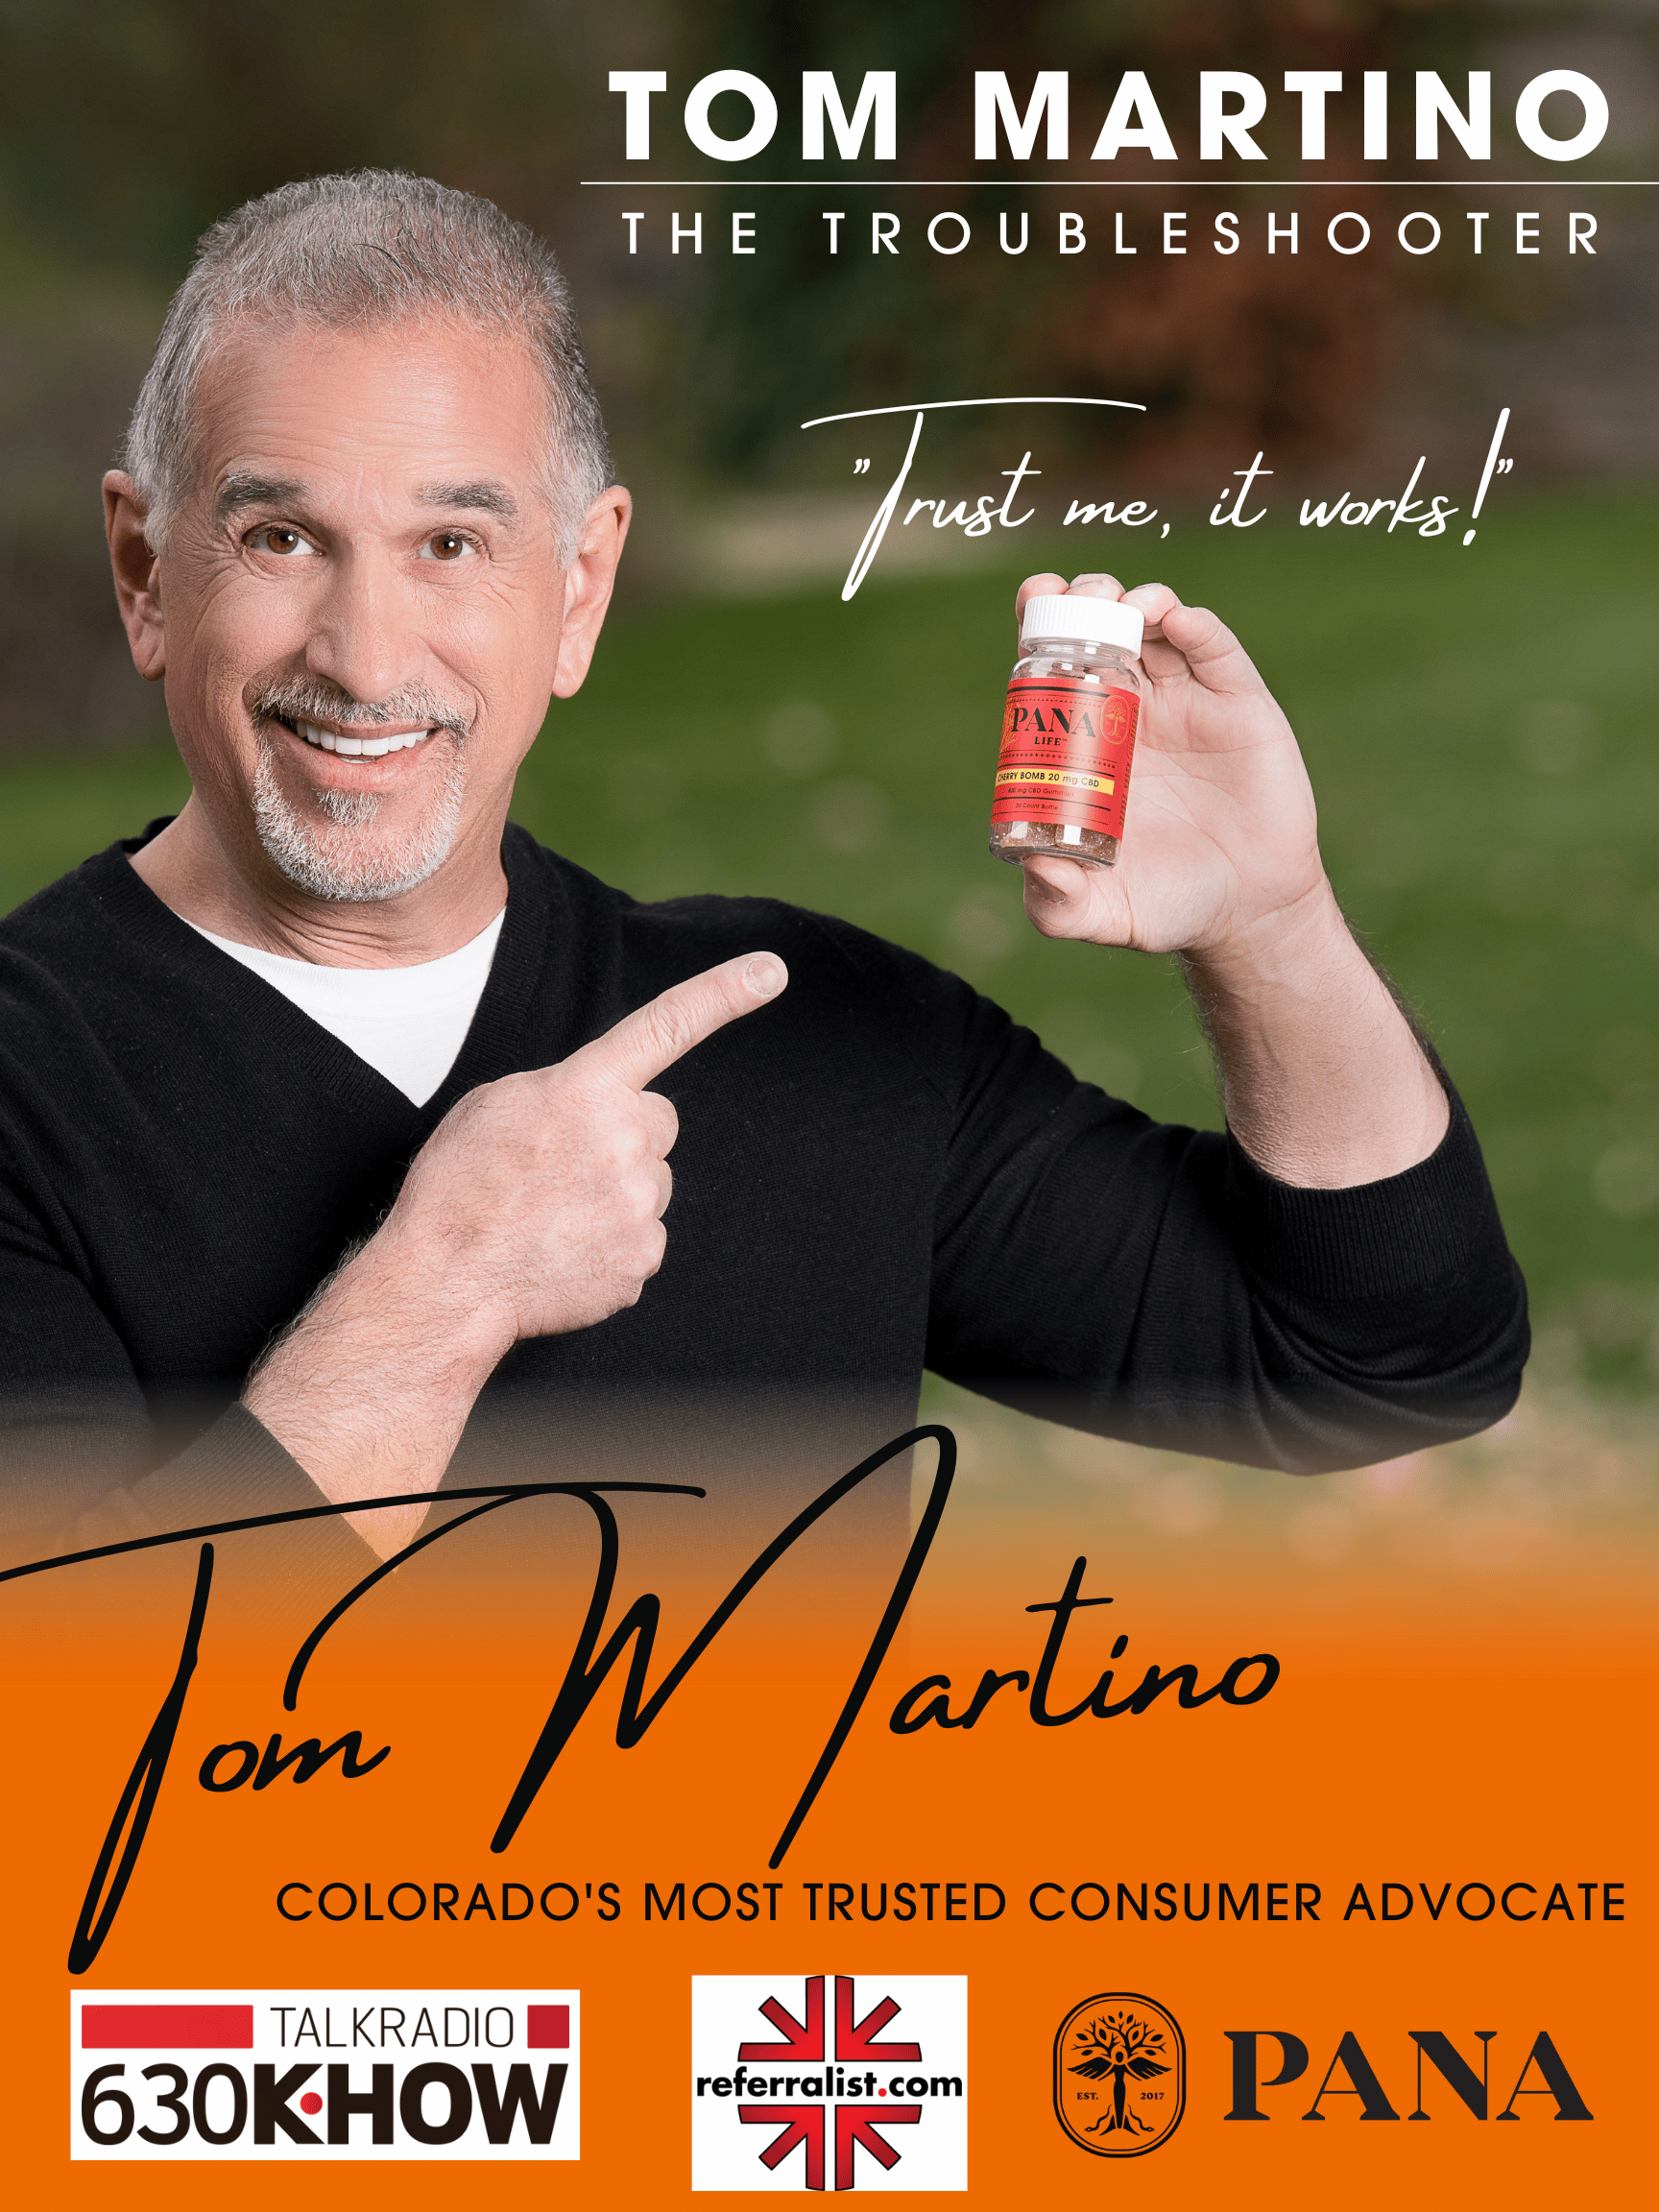 Tom Martino holding Cherry Bomb product saying "it works!"